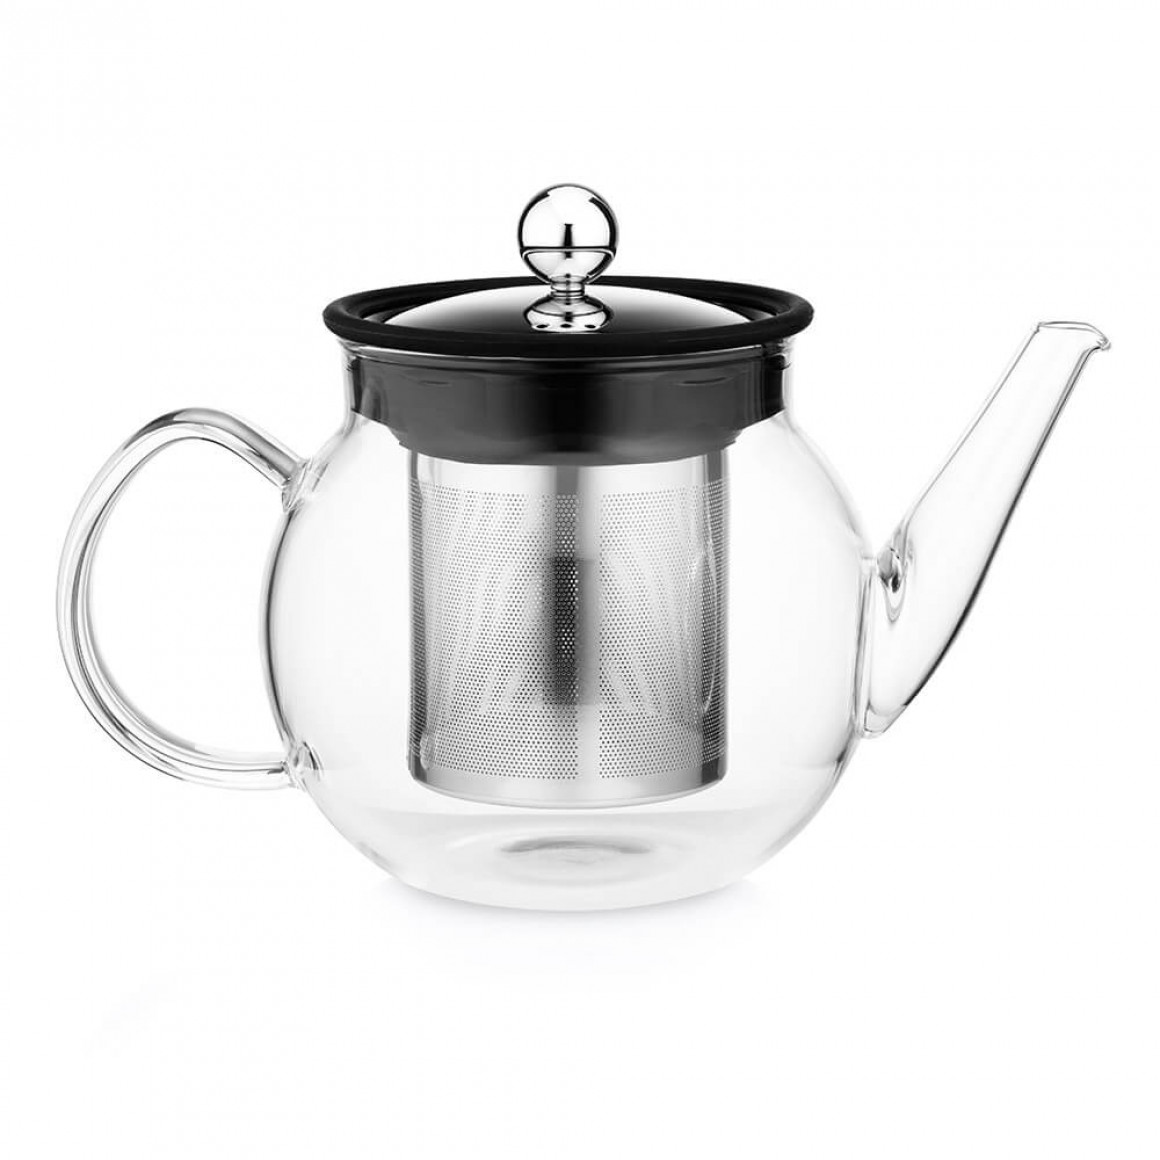 6 cup glass teapot with infuser